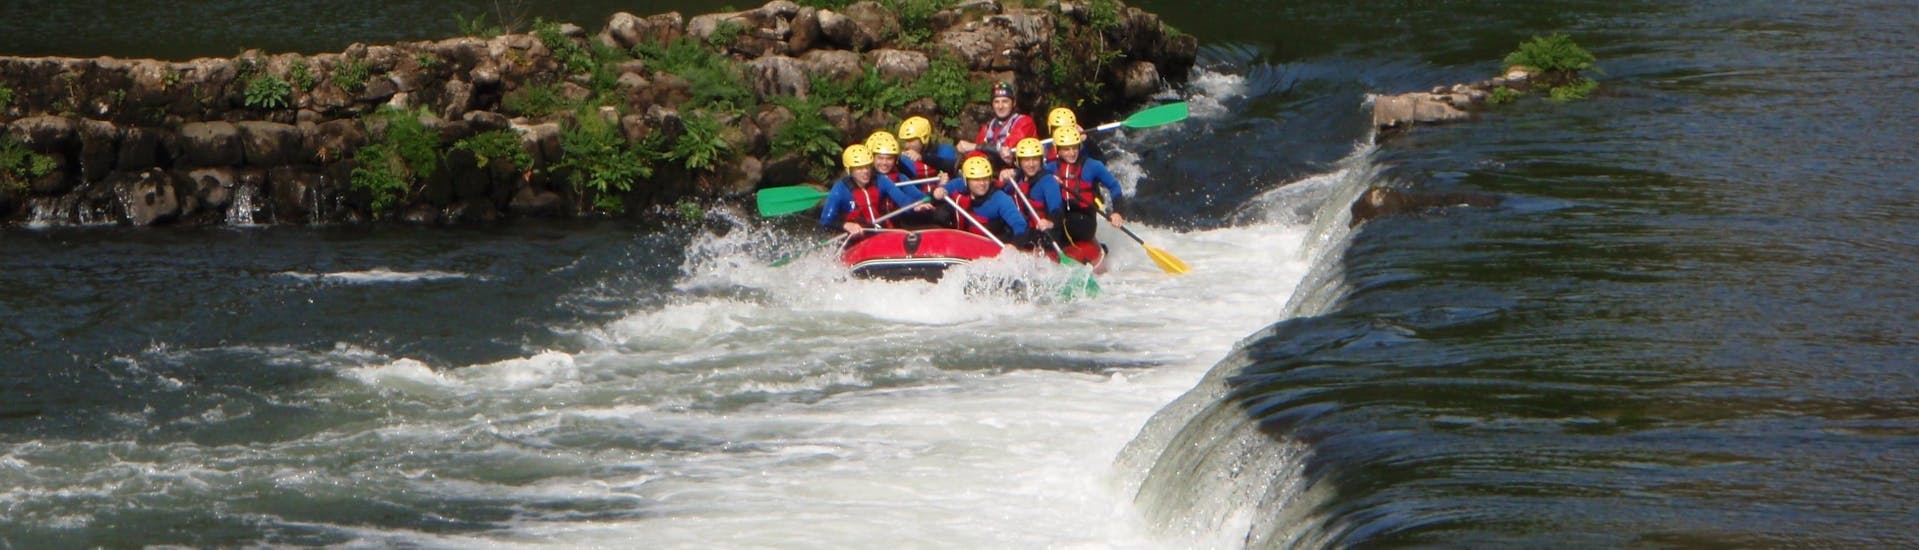 Classic Rafting on the Río Ulla with Amextreme Aventura Galicia - Hero image